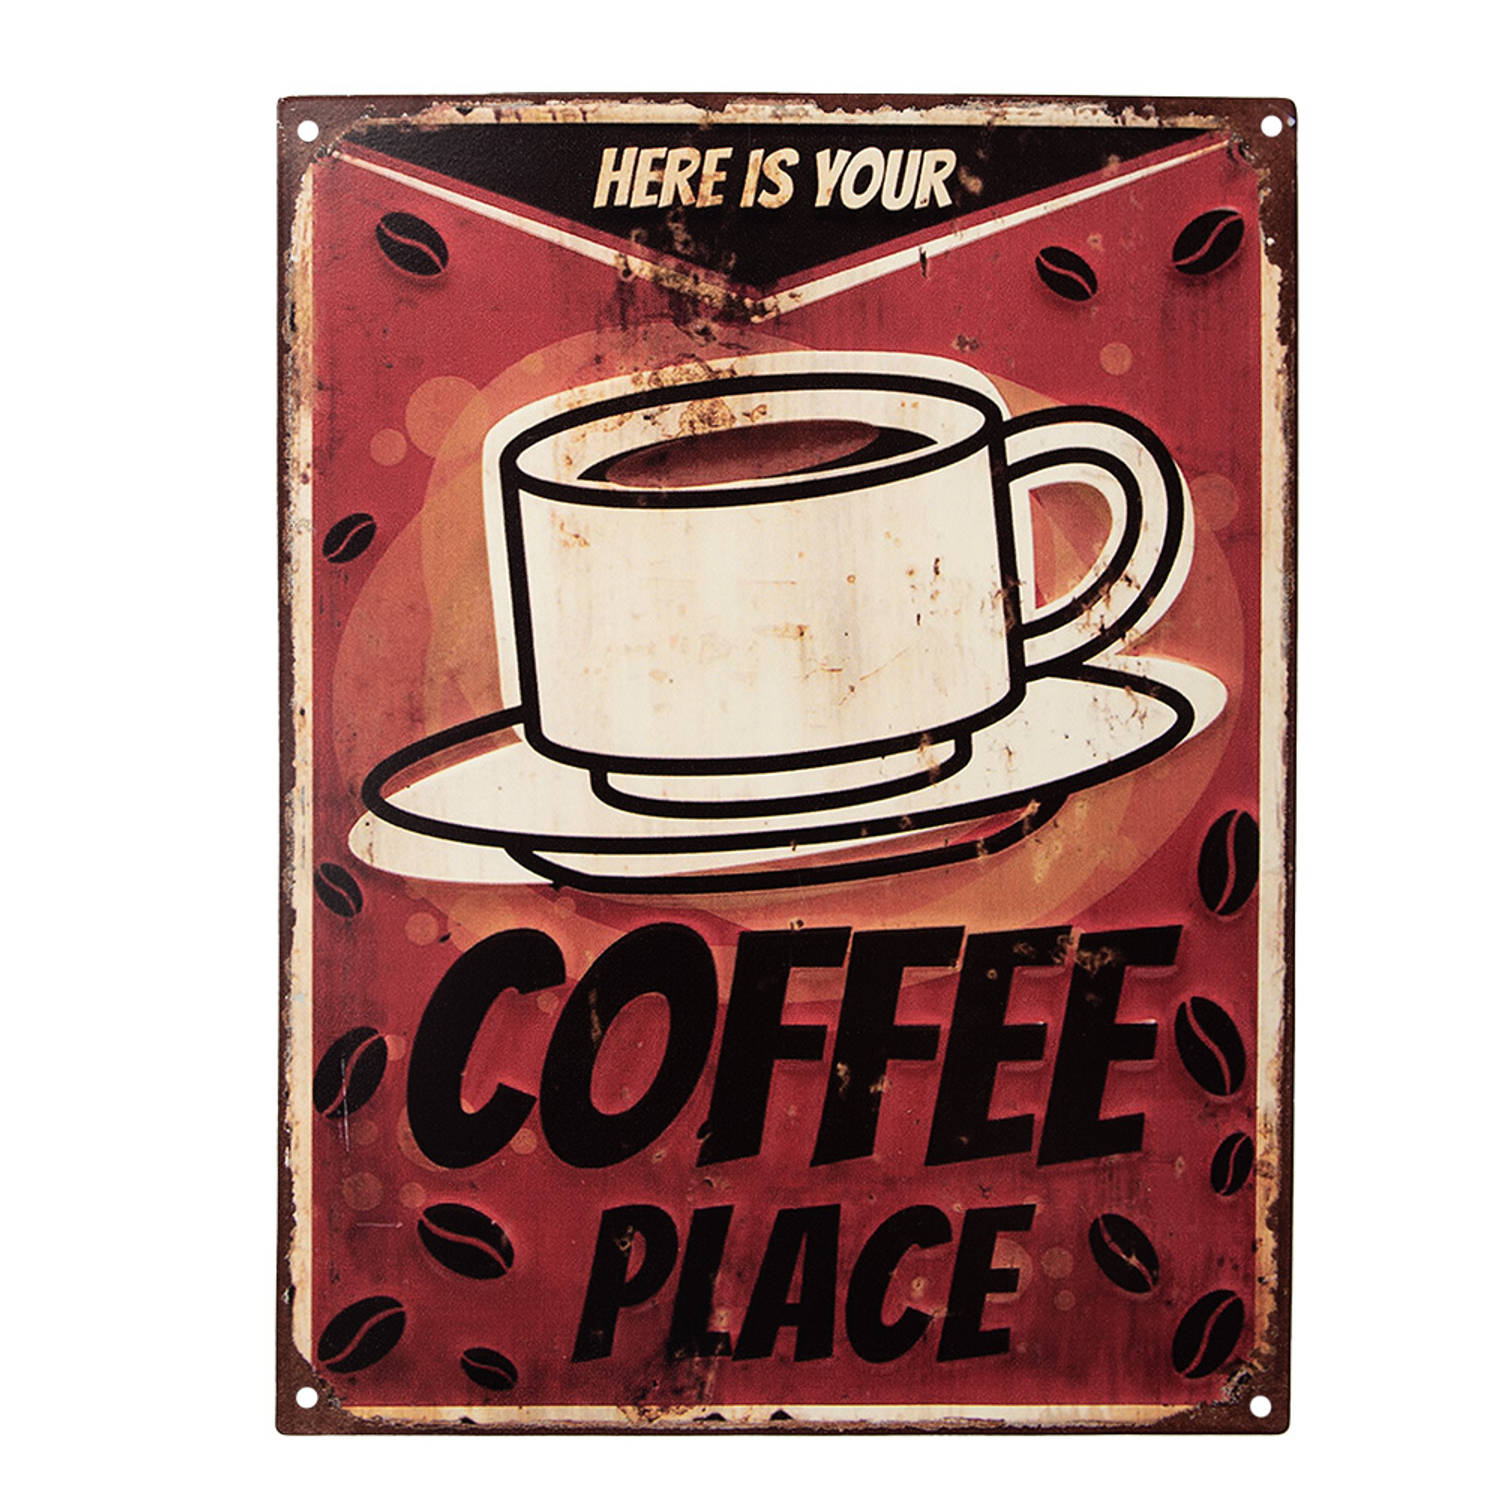 Clayre & Eef Tekstbord 25x33 Cm Rood Ijzer Kop Koffie Here Is Your Coffee Place Wandbord Spreuk Wand